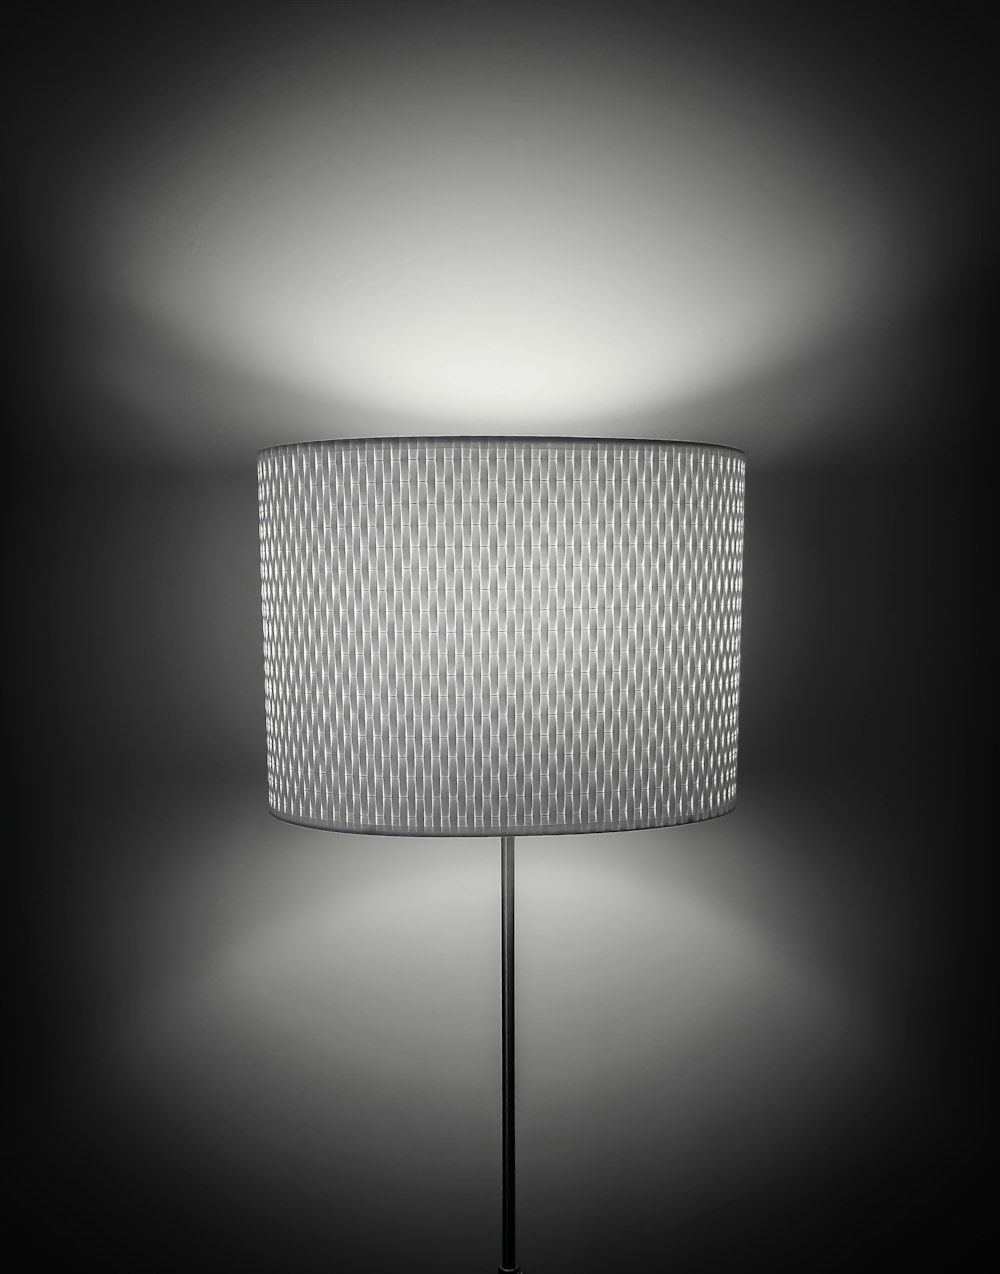 lamp on grayscale photography